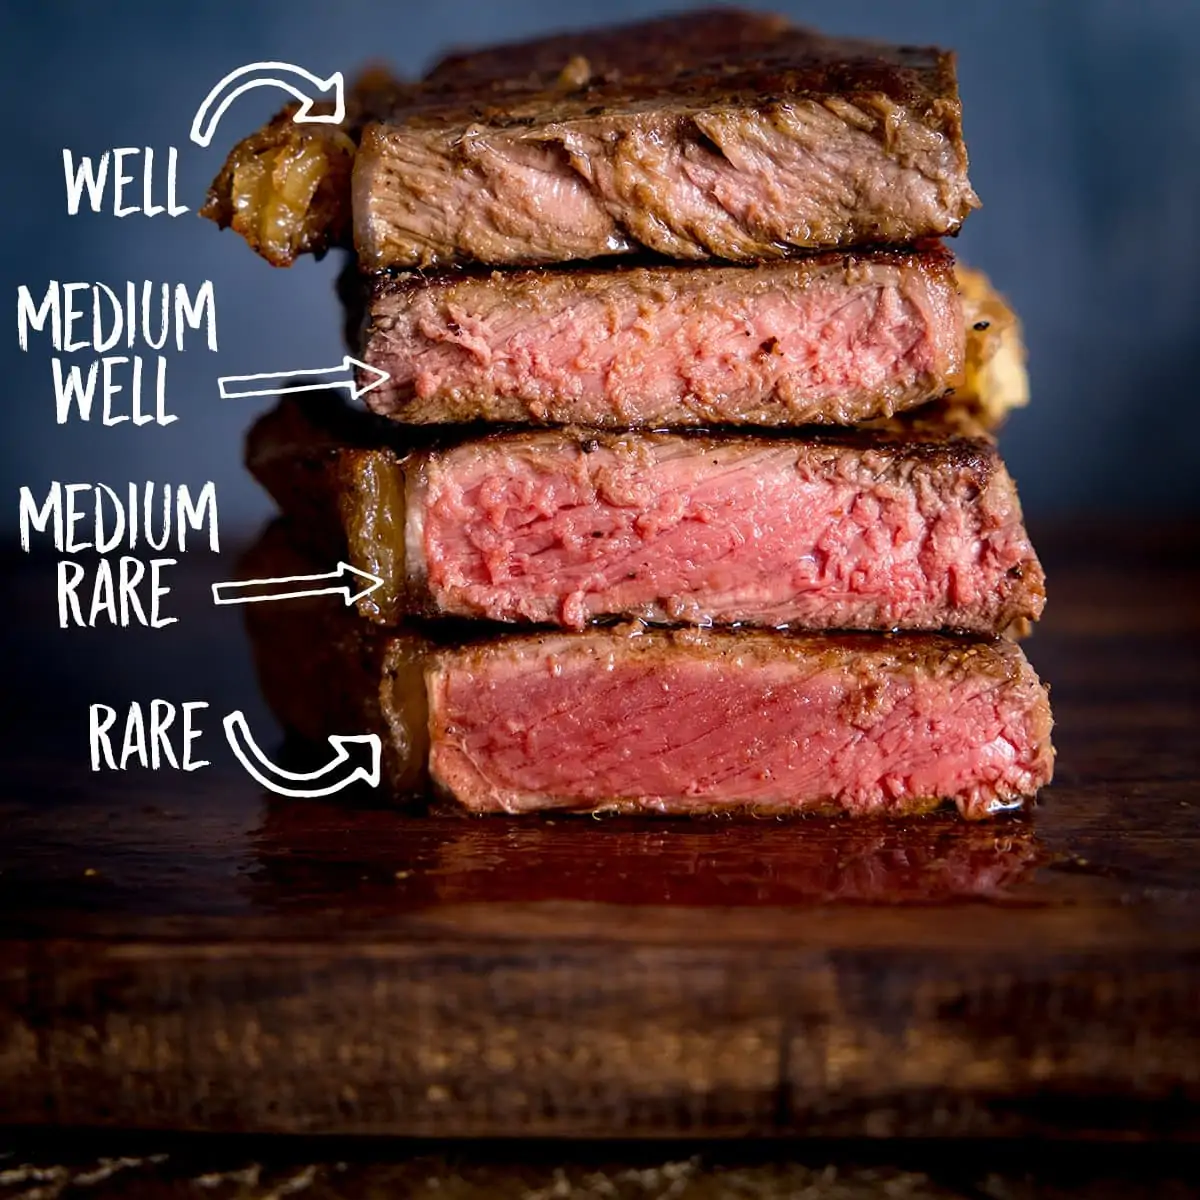 https://www.kitchensanctuary.com/wp-content/uploads/2021/09/How-to-cook-the-perfect-steak-square-FS.webp